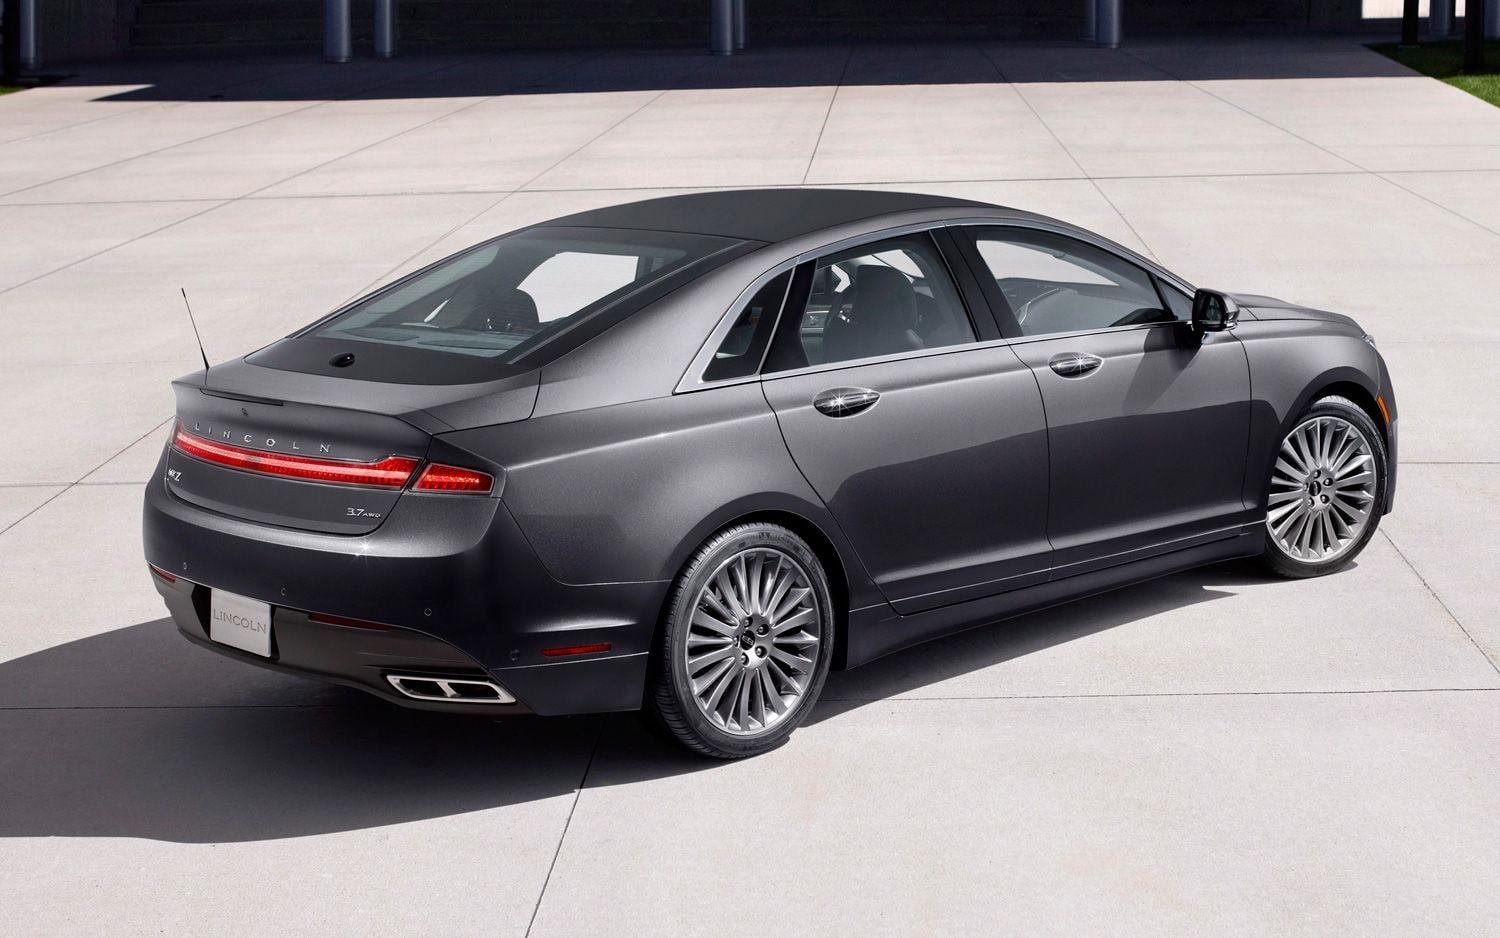 2013 Lincoln MKZ Online Configurator Includes Unconfirmed Pricing, Options